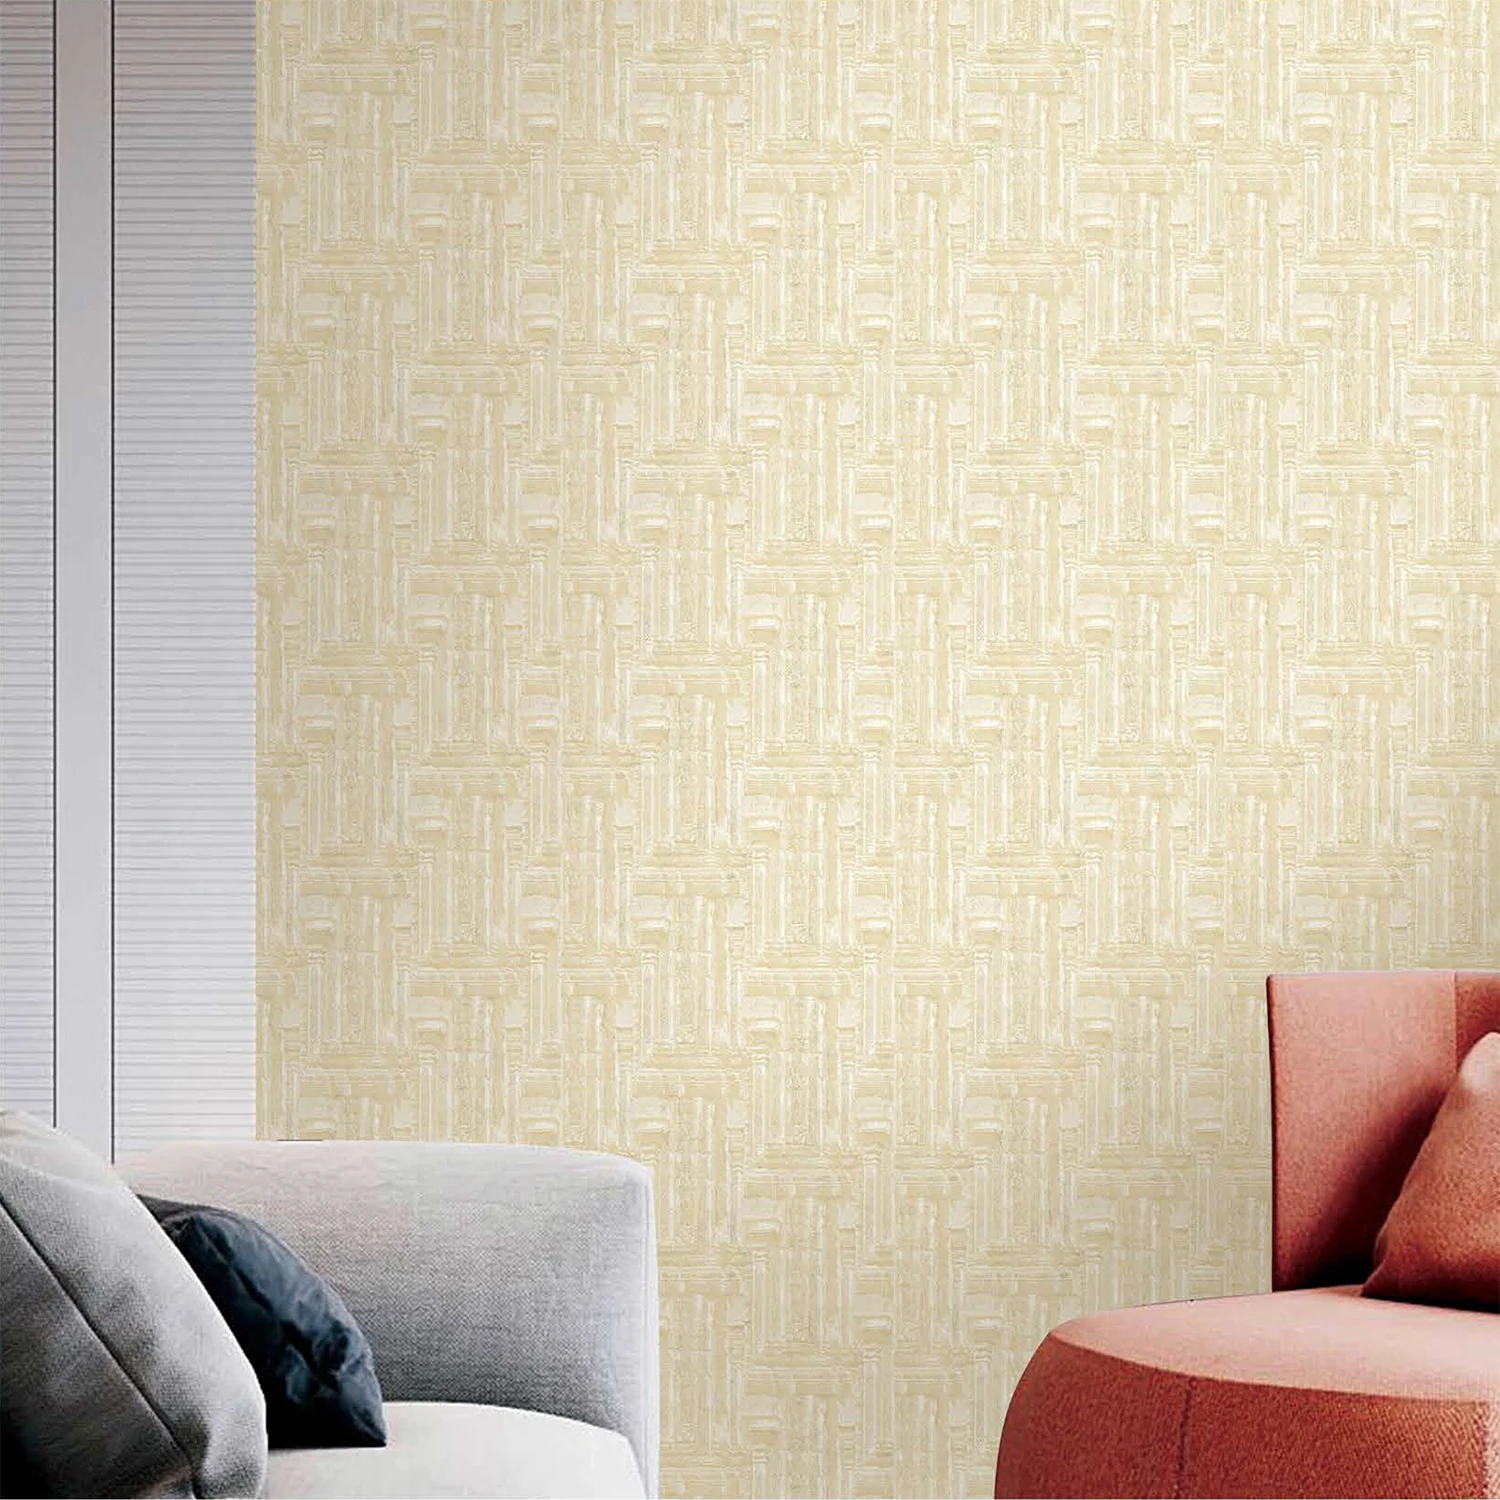 Factory Price Pvc 3d Brick Wallpaper Home Decoration Offered By  Manufacturer - Buy 3d Brick Wallpaper,Wallpaper Home Decoration,Wallpaper  Manufacturer Product on 